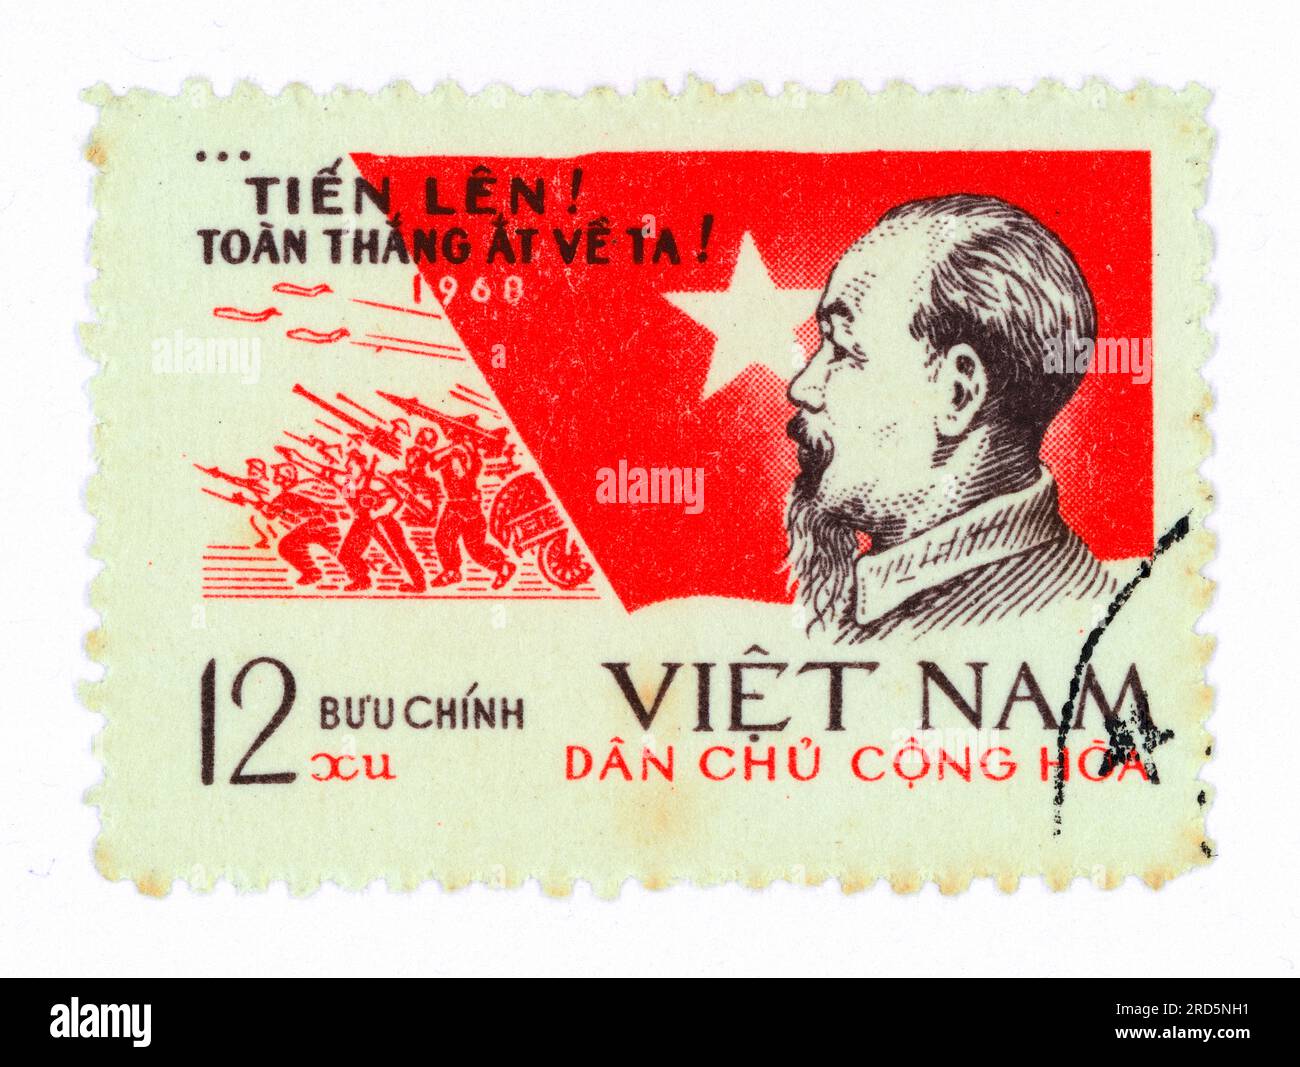 Ho Chi Minh (1890 – 1969). Postage stamp issued in Vietnam in 1968. Themes: New Year message, aviation, army. Stock Photo